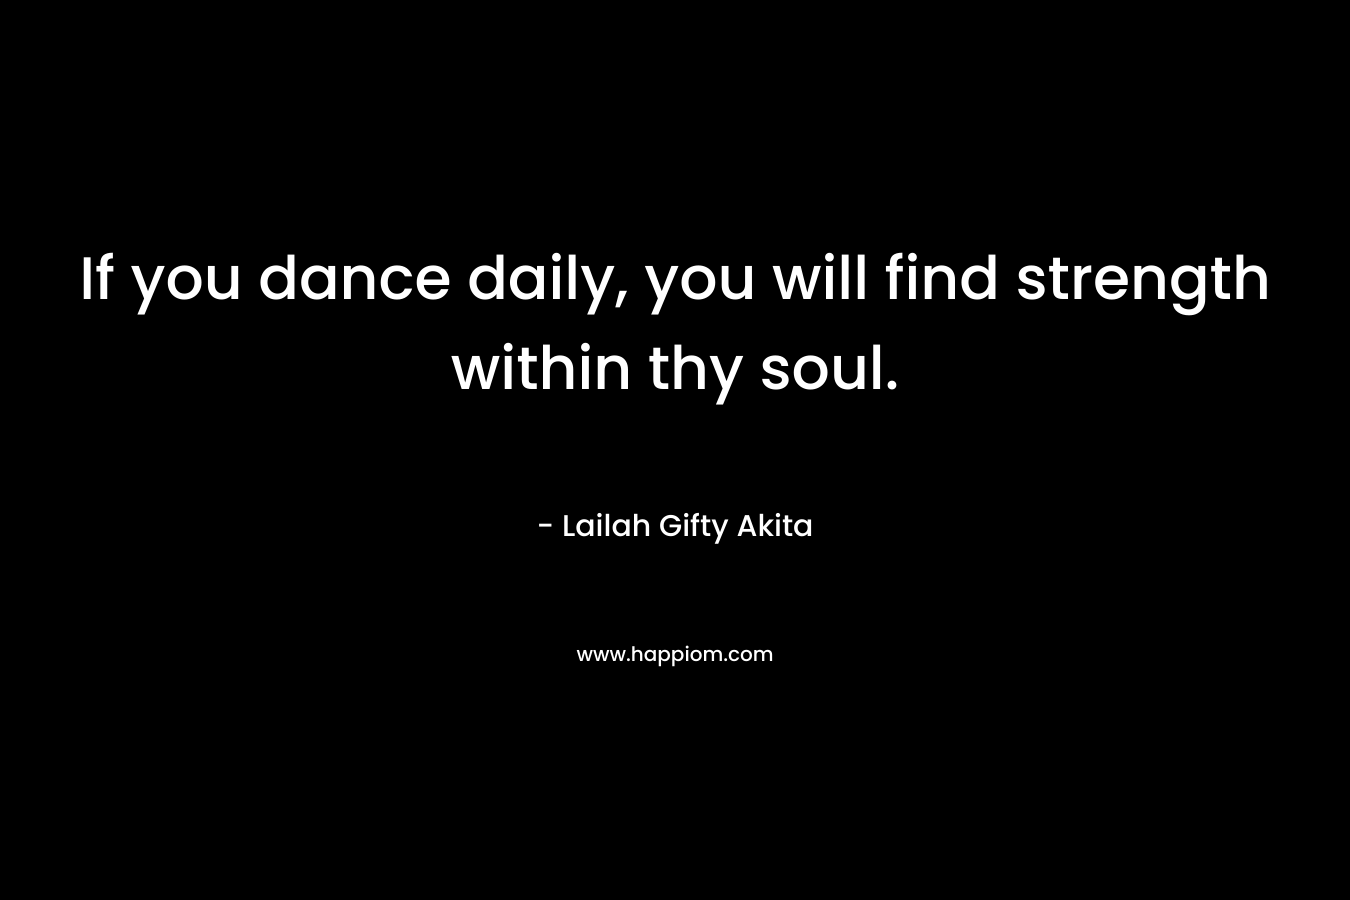 If you dance daily, you will find strength within thy soul.